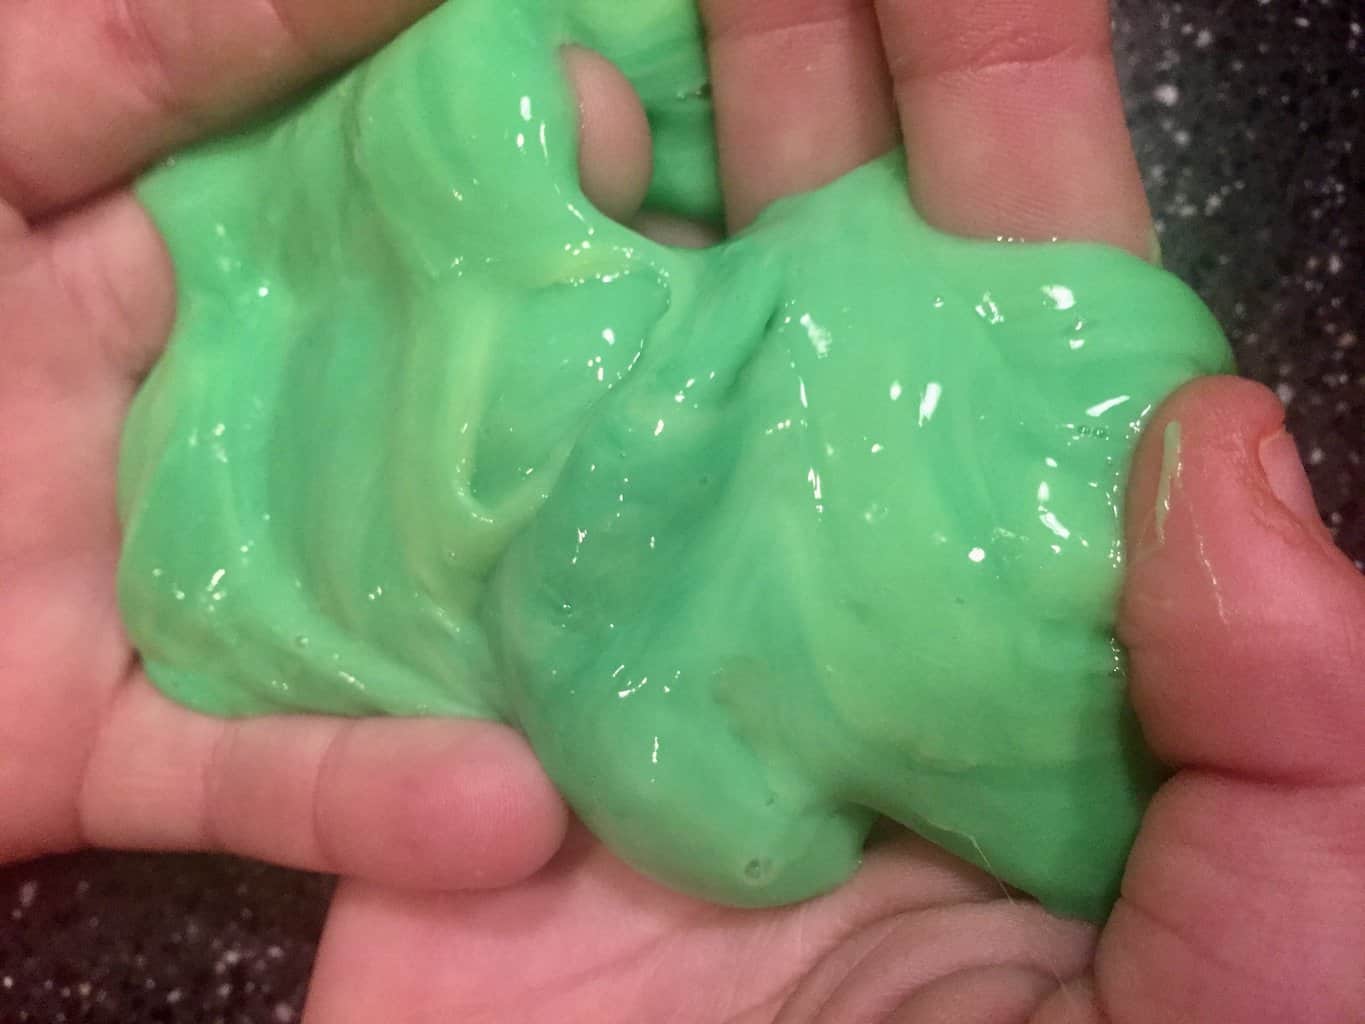 Make your own slime for Halloween using made in the USA ingredients.